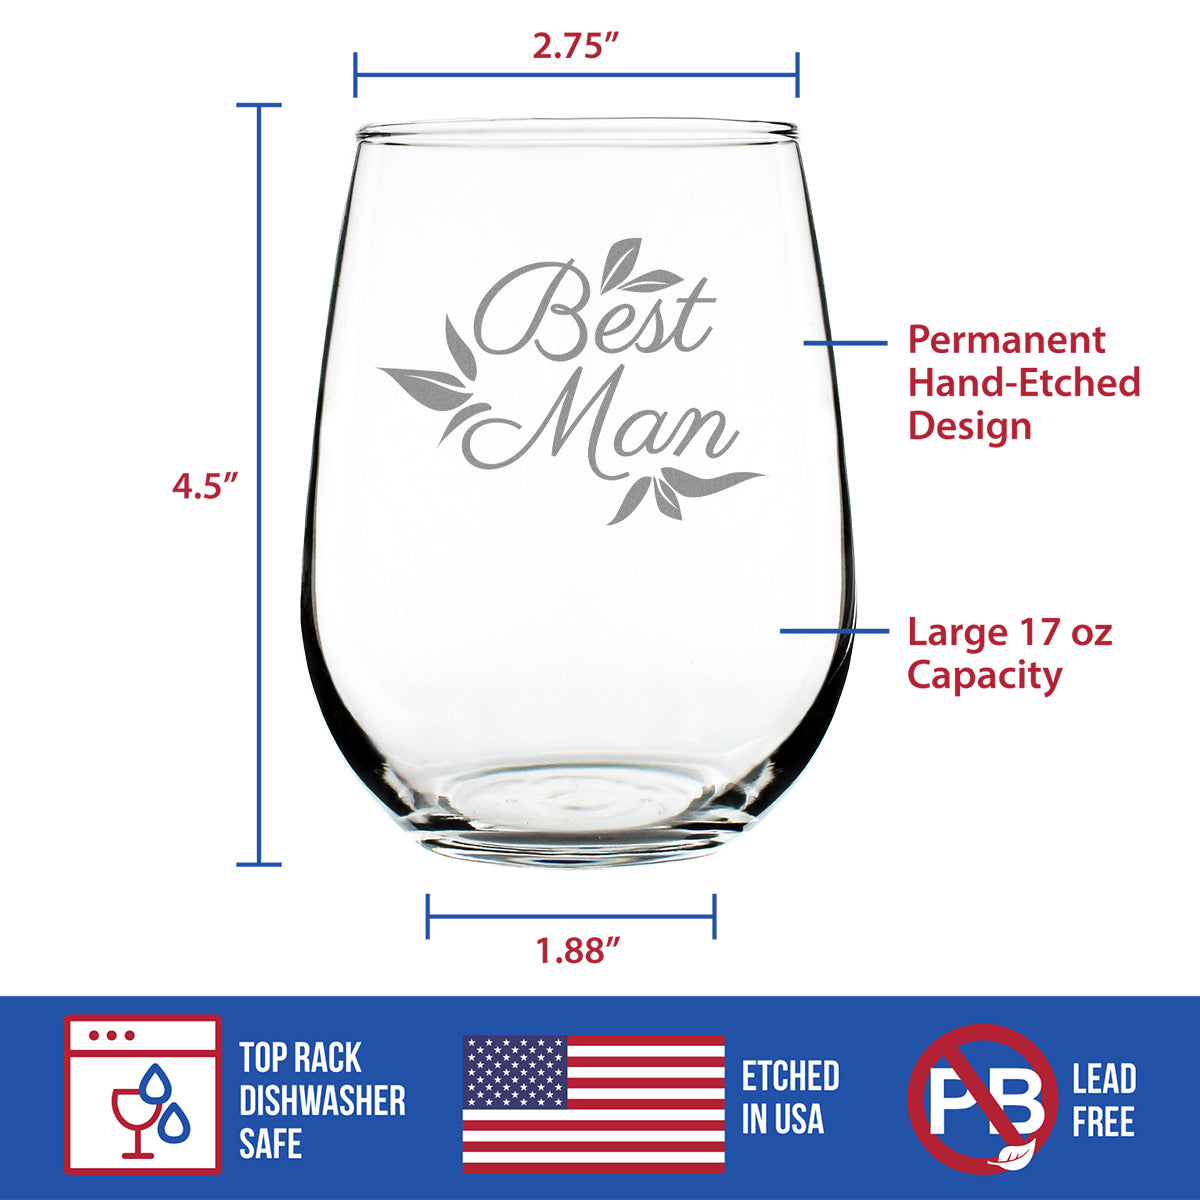 Best Man Stemless Wine Glass - Groomsmen Proposal Gifts - Unique Engraved Wedding Cup Gift